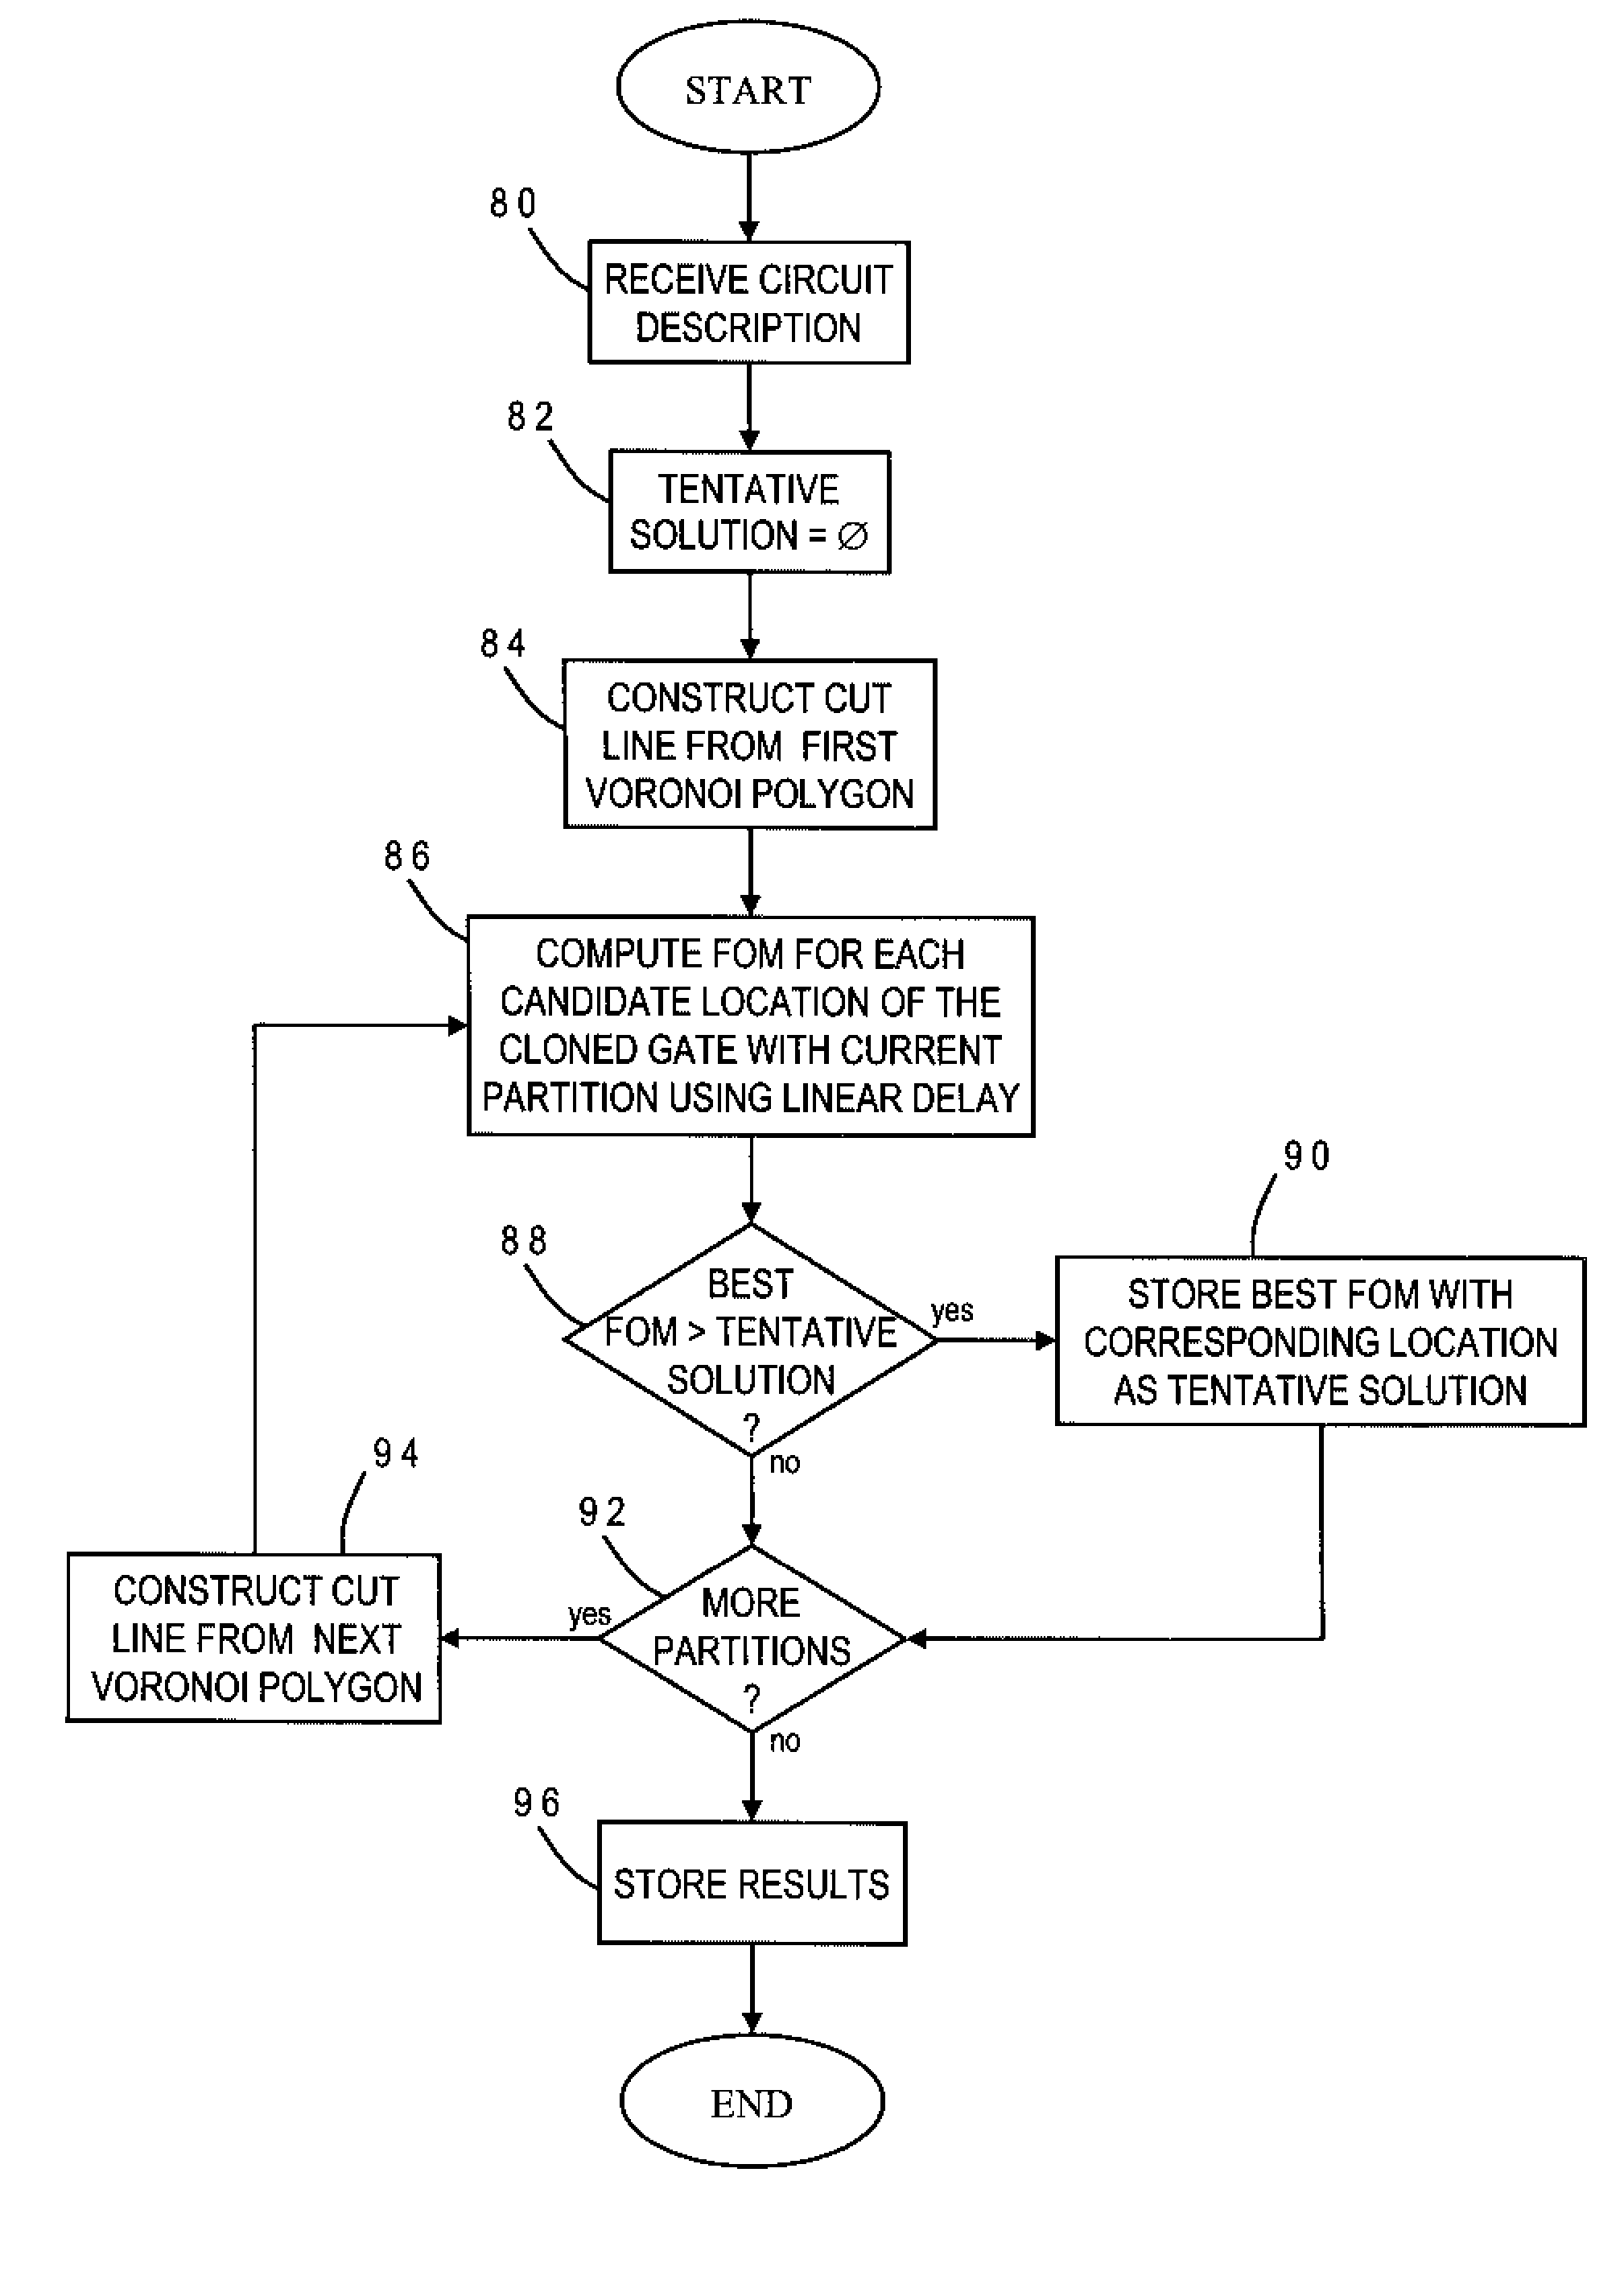 Methods for Optimal Timing-Driven Cloning Under Linear Delay Model